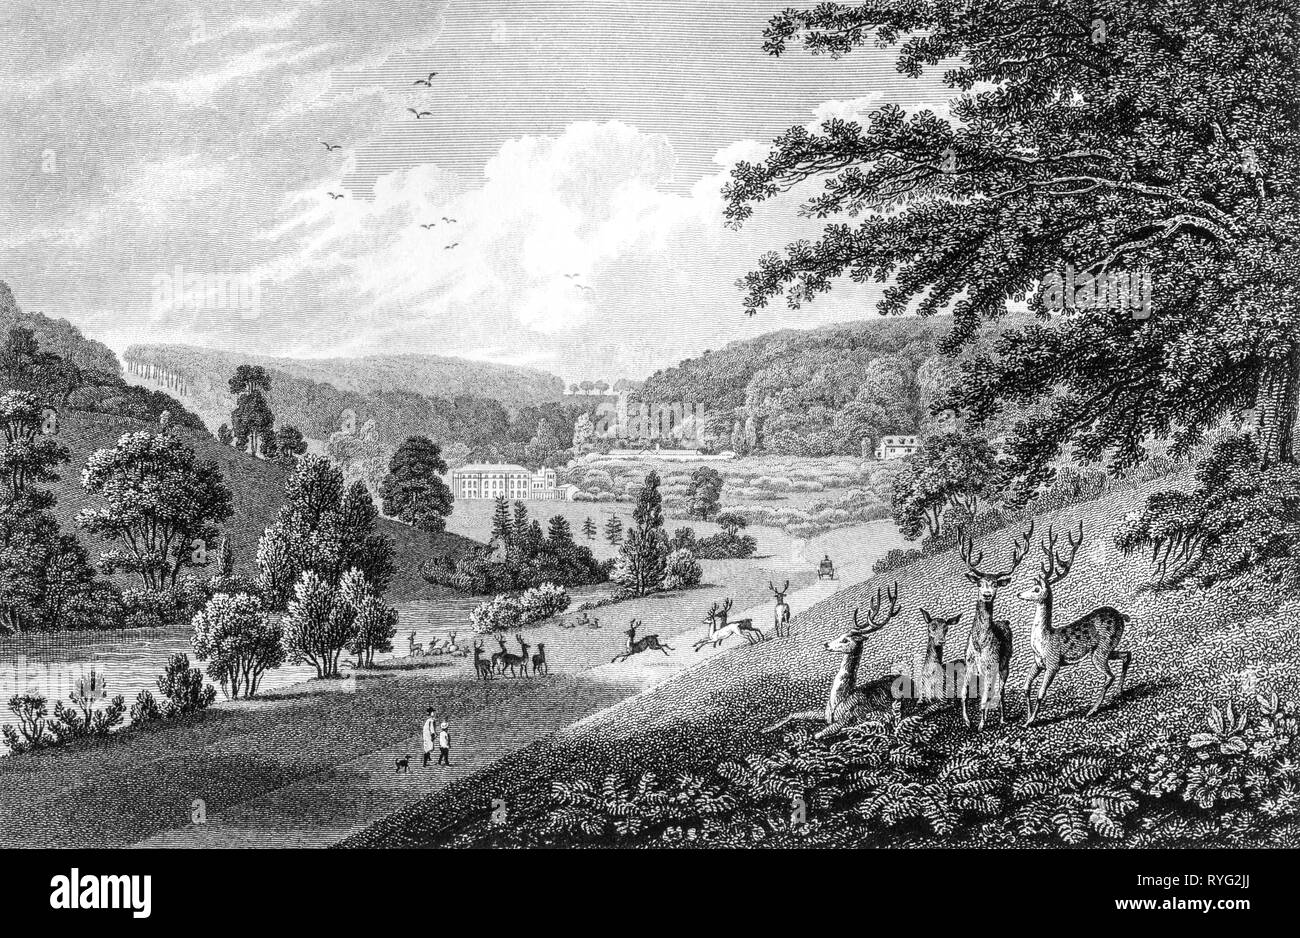 Engraving of Spring Park Mansion, Woodchester, Gloucestershire UK scanned at high resolution from a book published in 1825.  Believed copyright free. Stock Photo